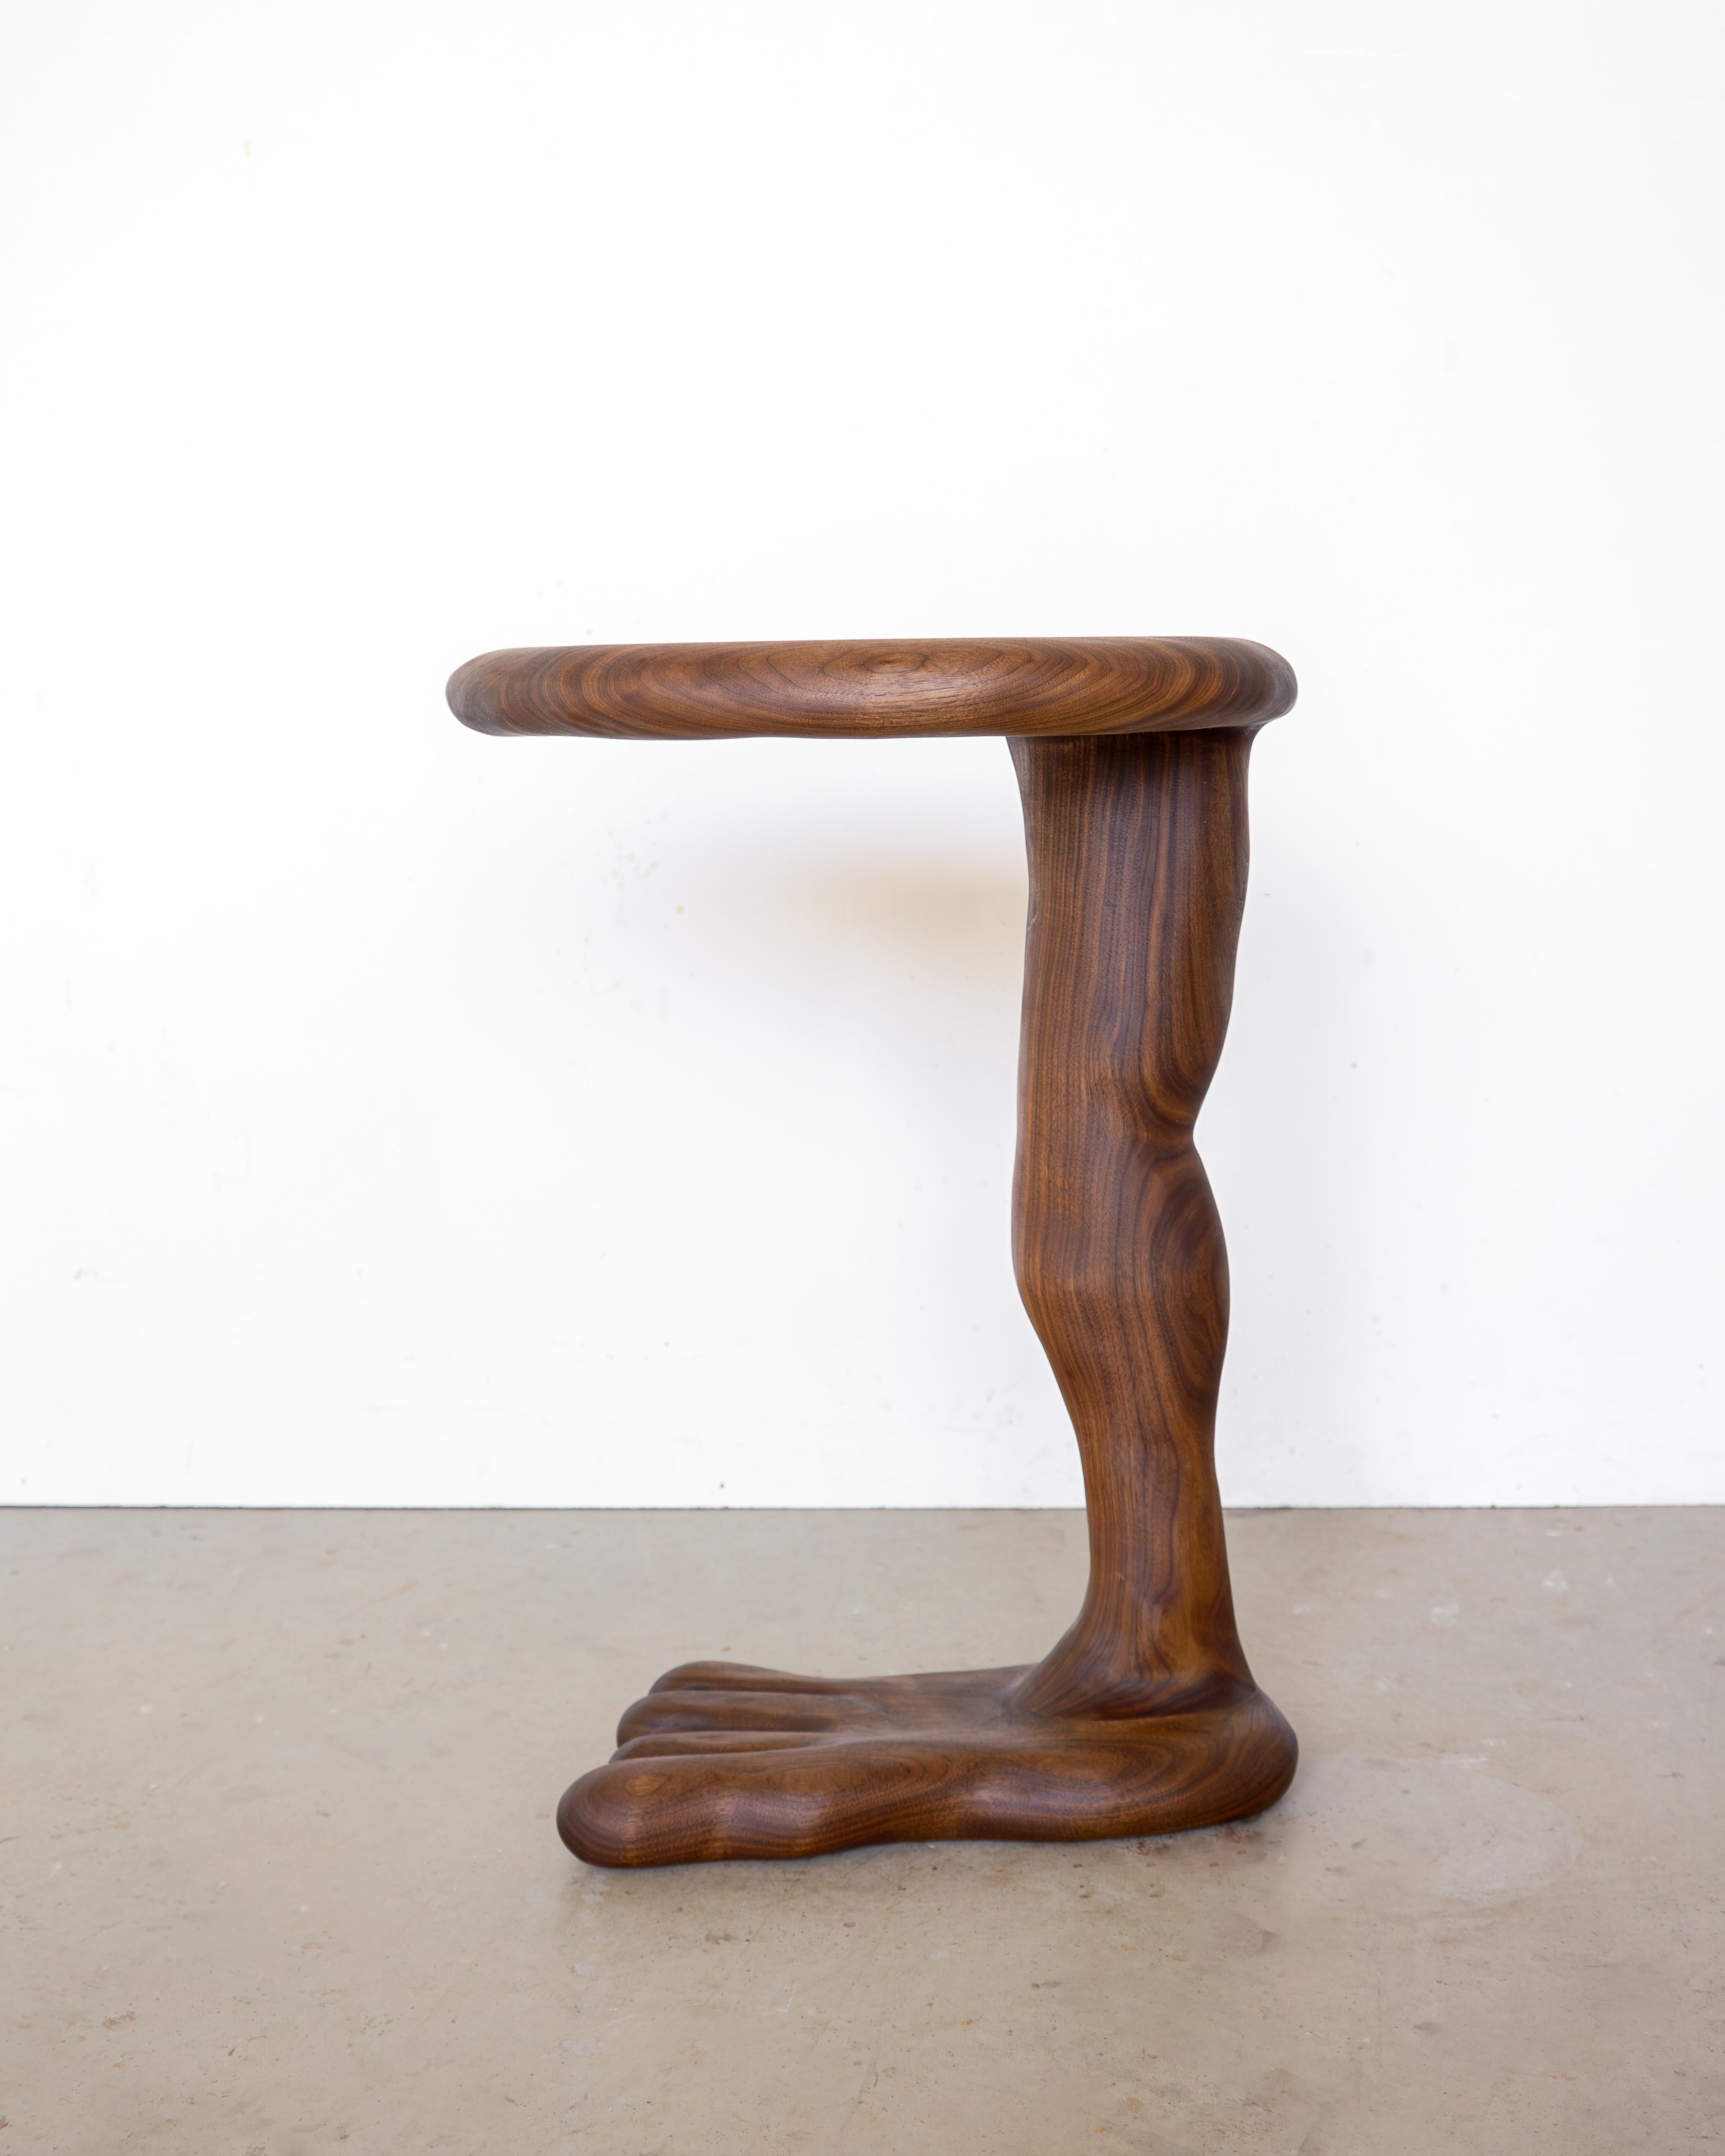 Organic Modern The Leg Side Table - Sculptural Table in Walnut Wood For Sale